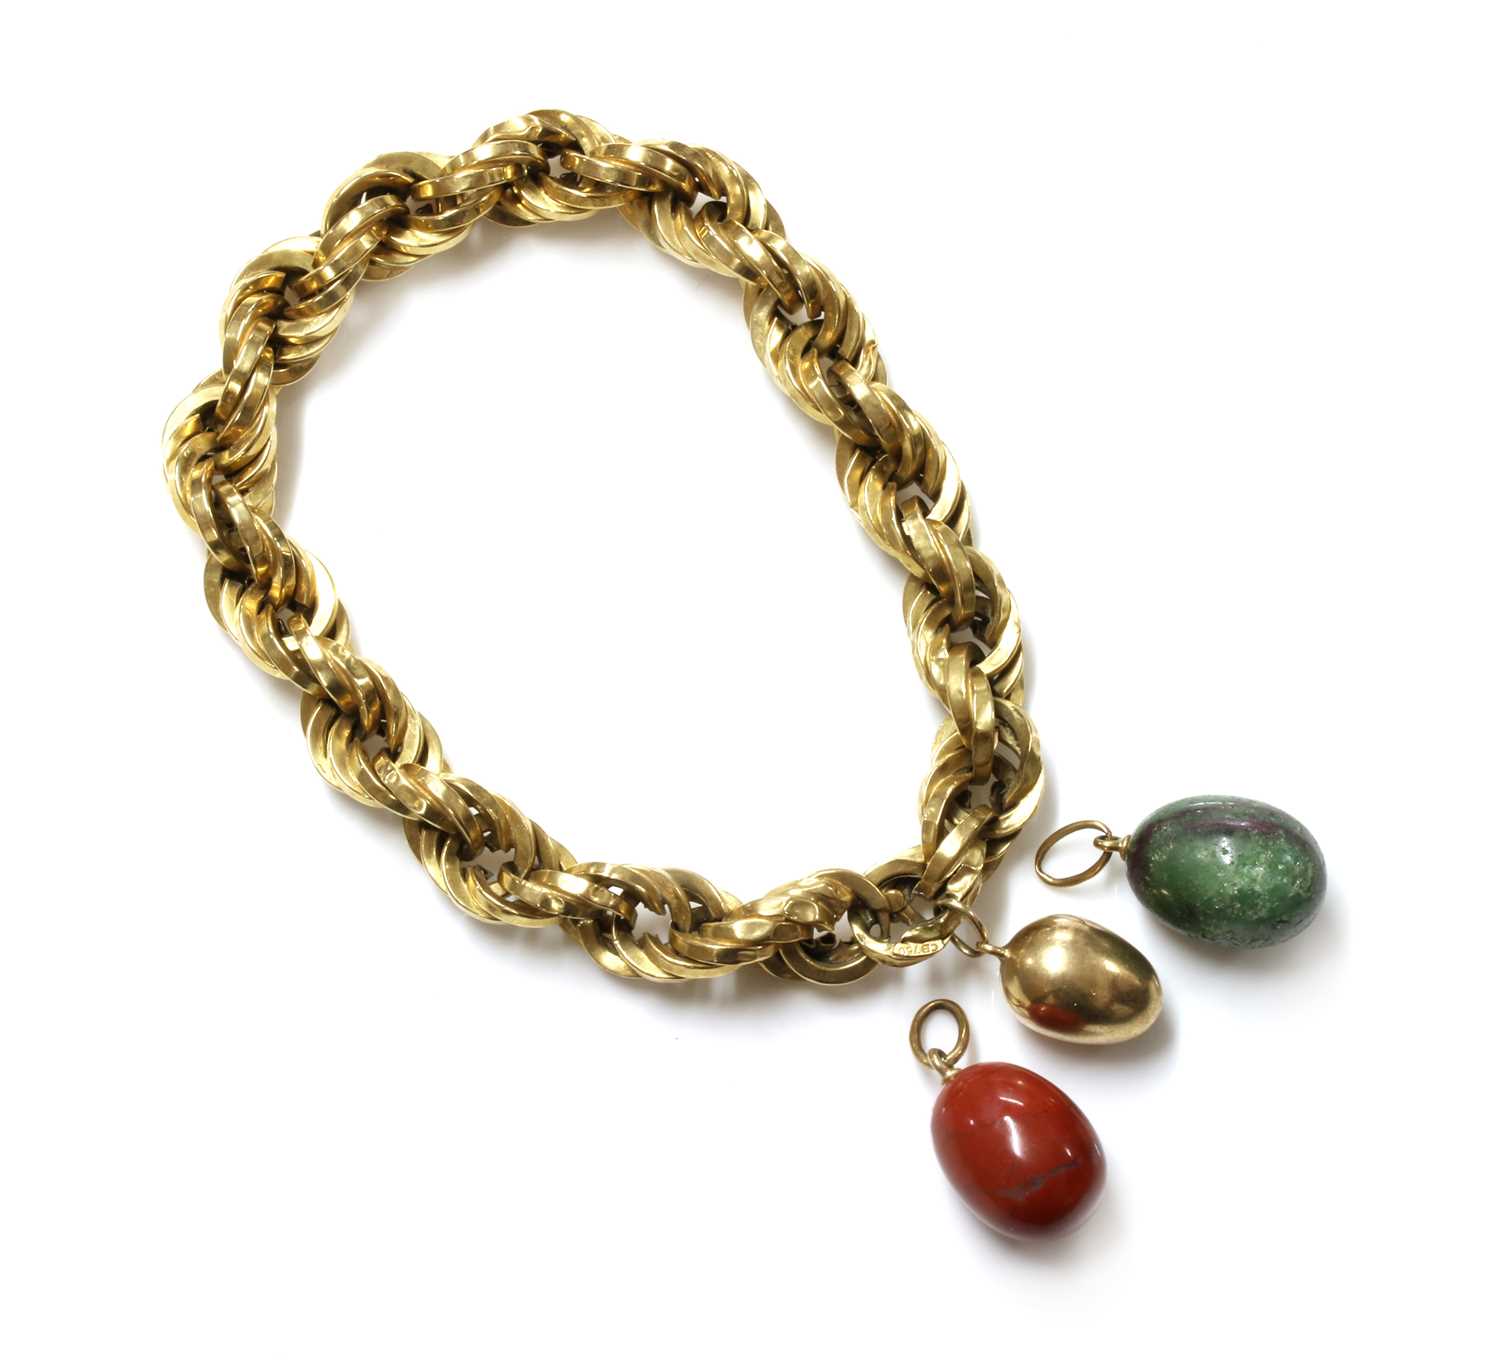 Lot 169 - A Continental hollow rope chain bracelet, c.1950